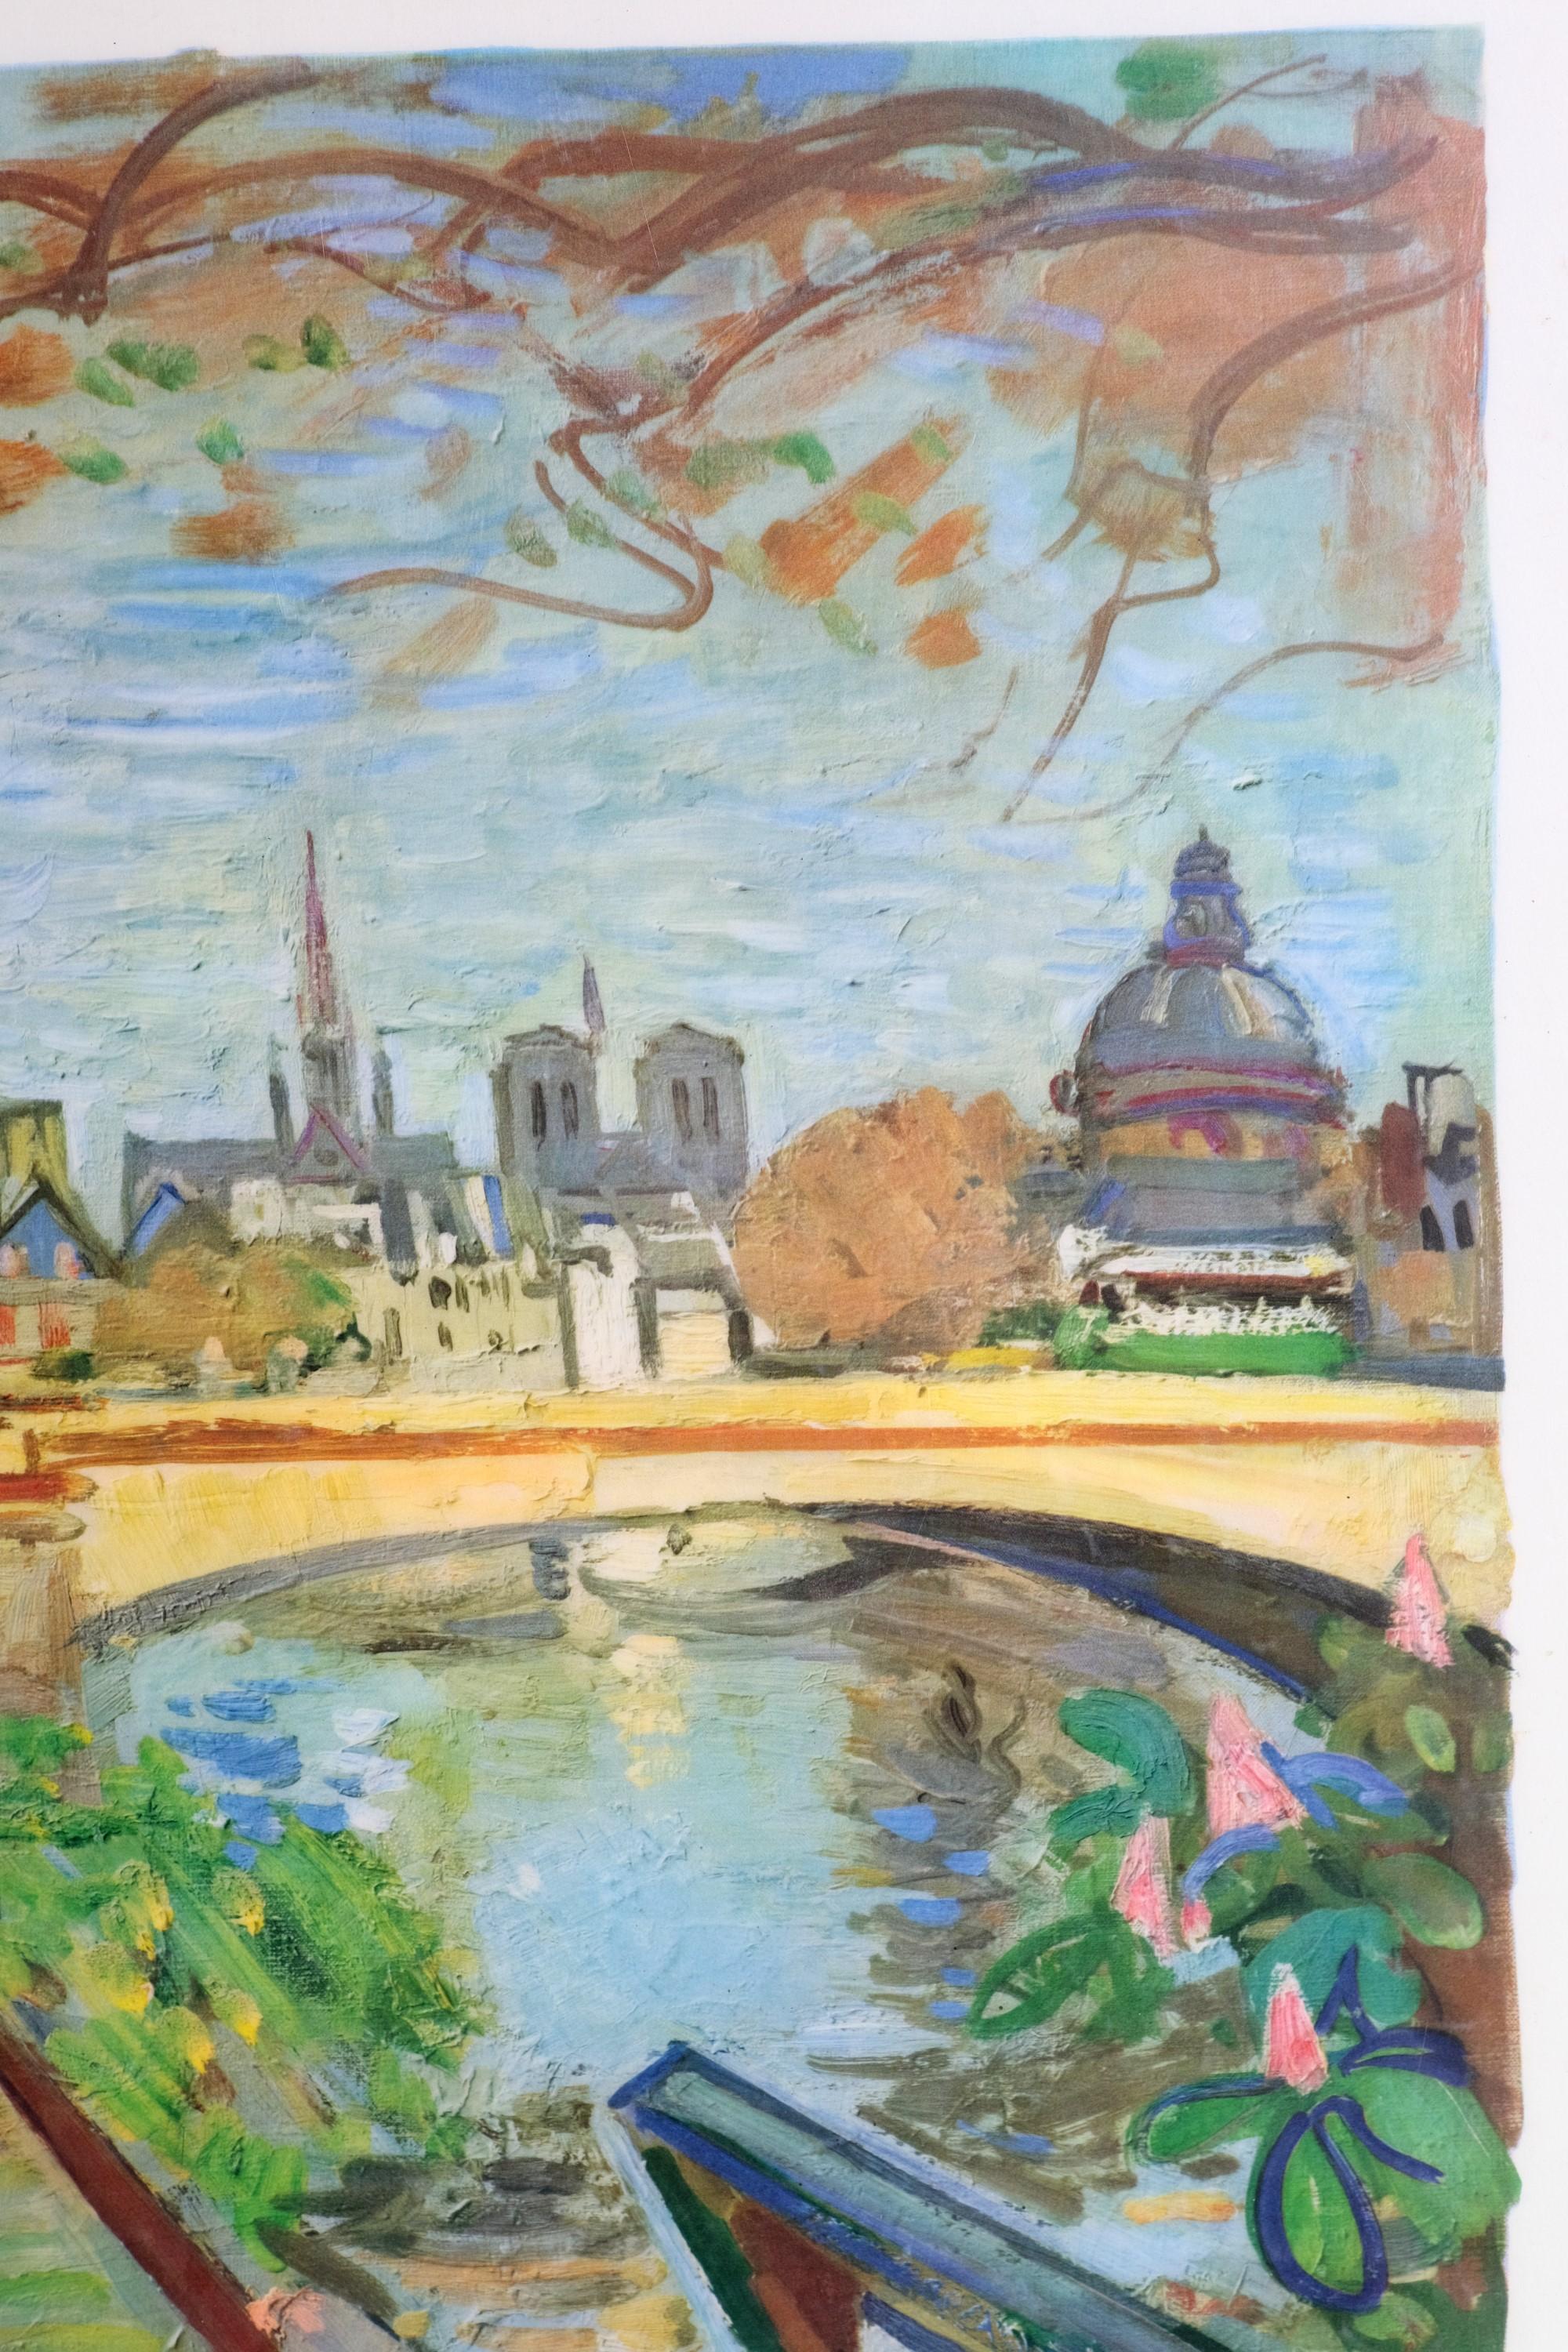 From Europe; a 1953 laminated poster of an impressionist Paris scene. Printing at bottom says National Society of French Railroads. Please note, this item is located in one of our NYC locations.